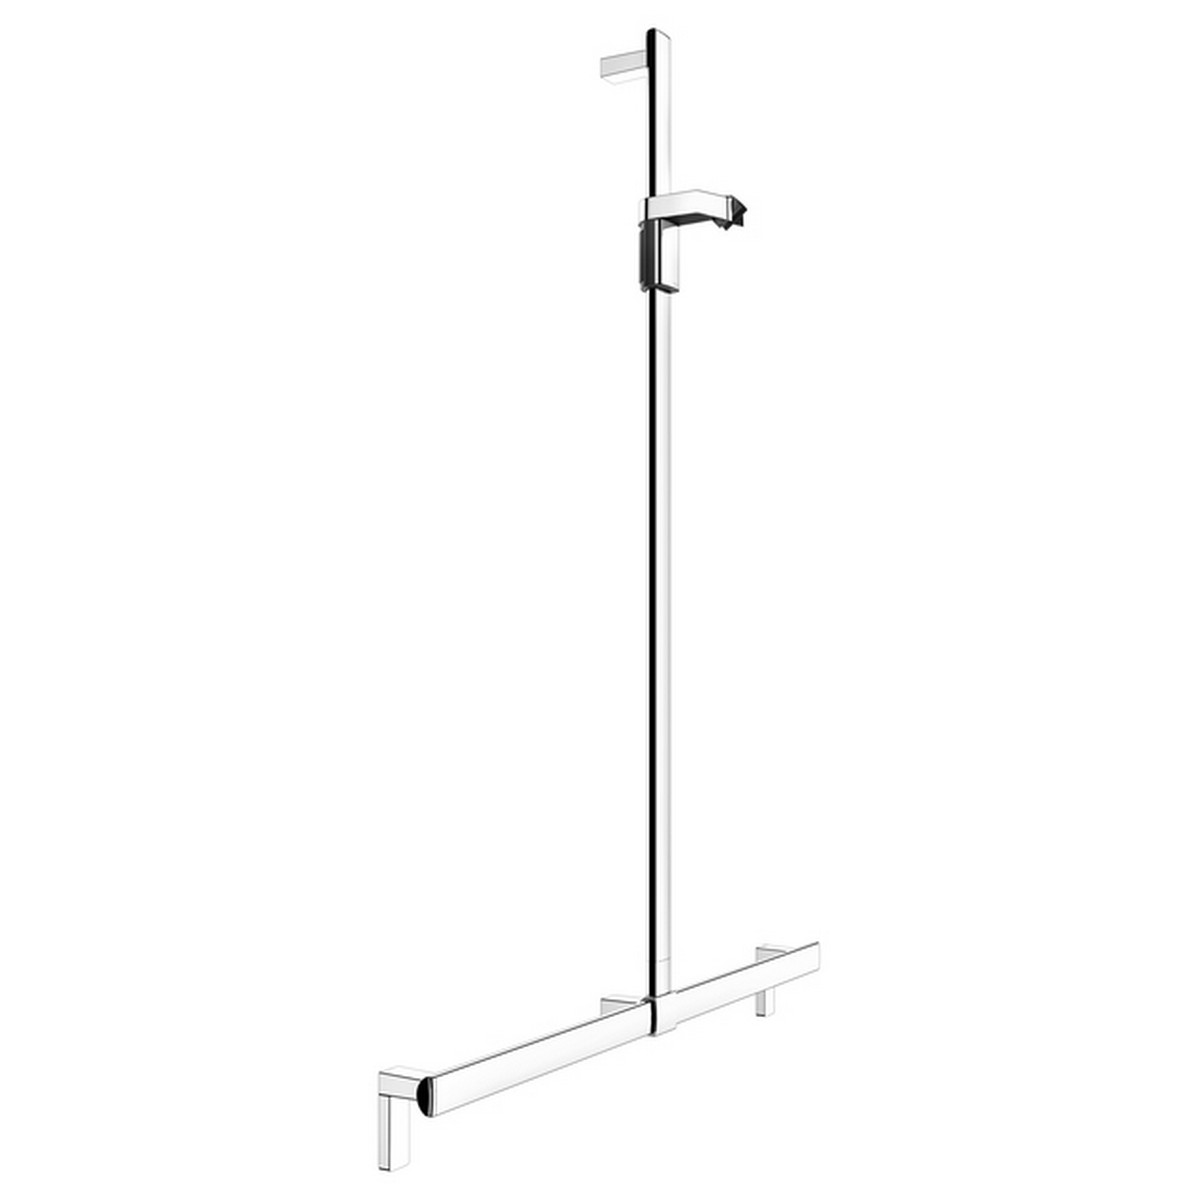 KEUCO 350141213 AXESS 45 1/4 INCH WALL MOUNTED SLIDE BAR WITH SLIDING HAND SHOWER HOLDER